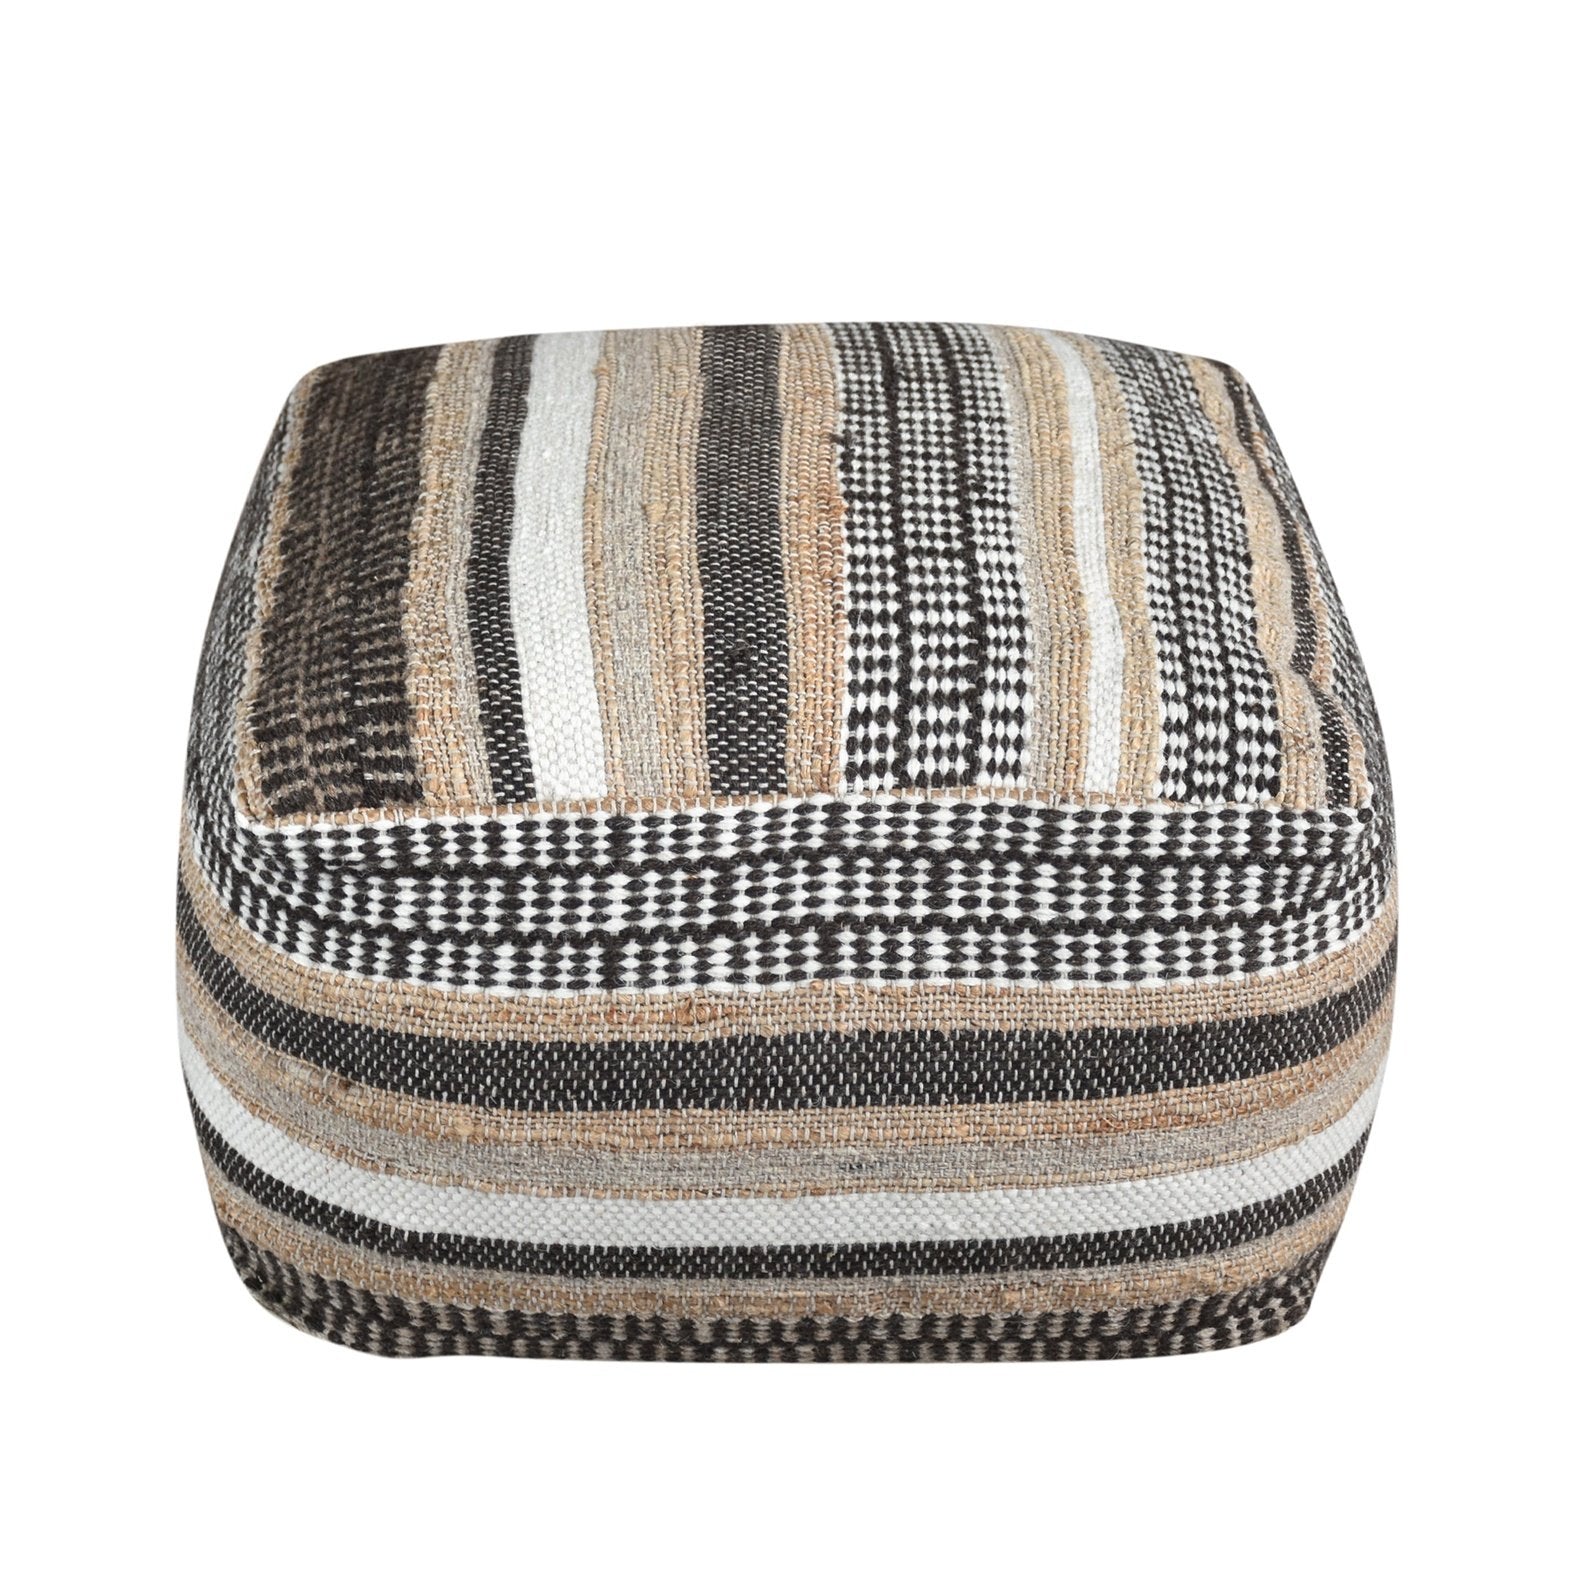 Yara Hand Woven Natural Large Pouffe Ivory & Linen 55x55x35cm Jute and Wool